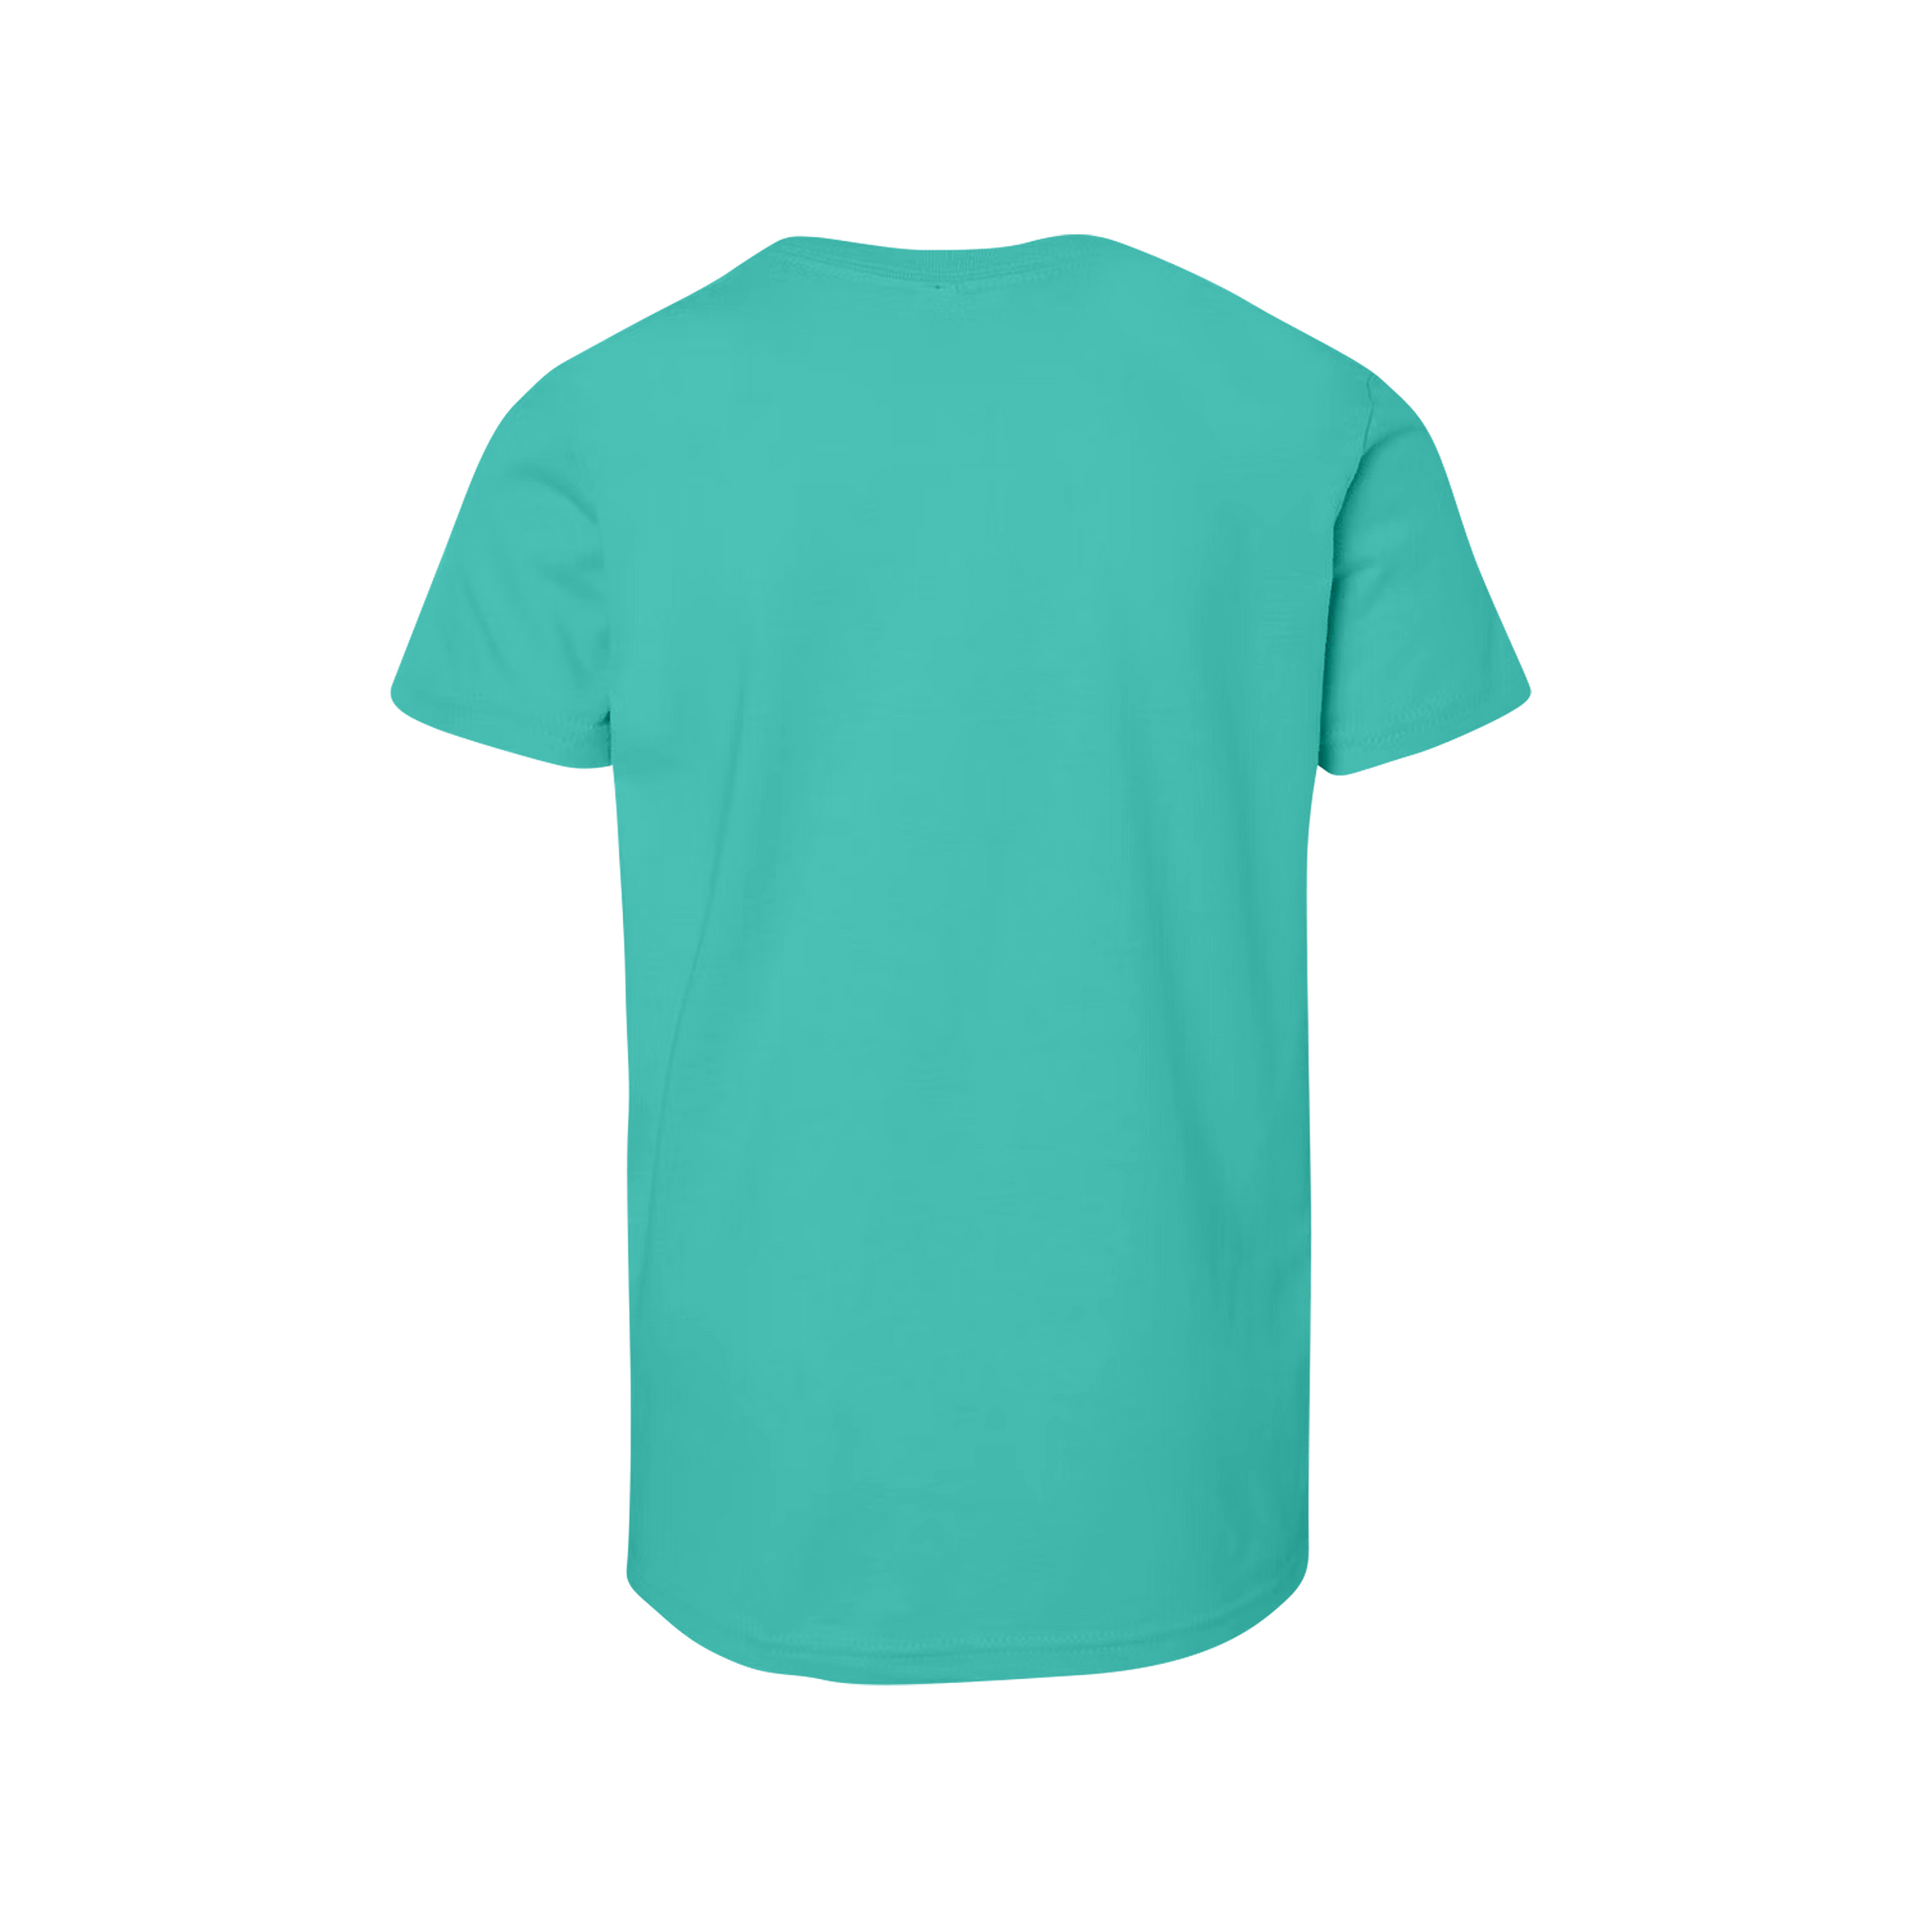 ATCQ Youth Silhouette Teal Tee